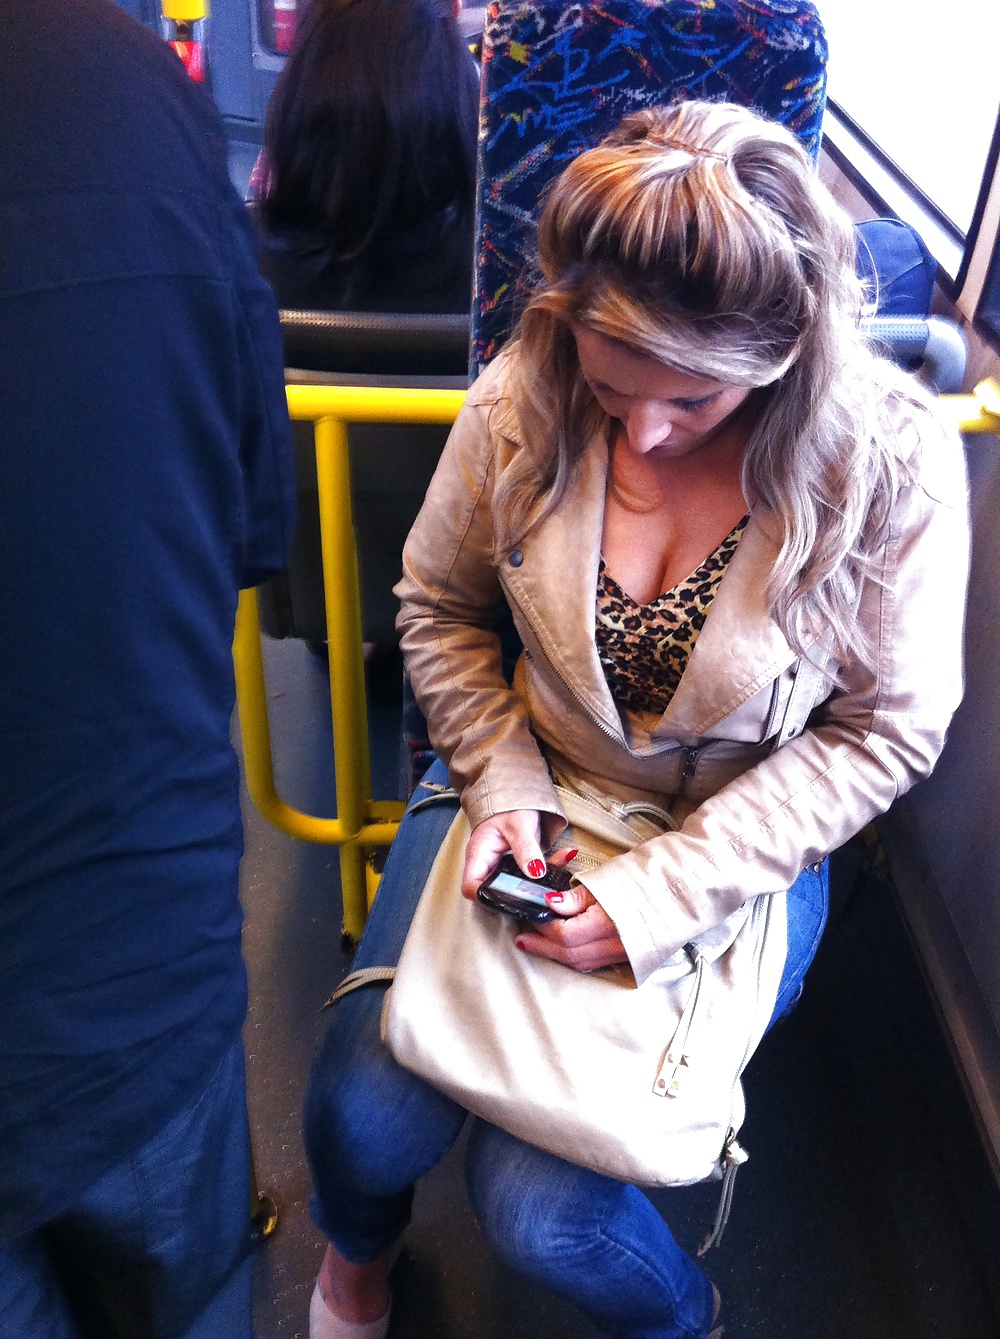 Perving on the bus #32064836